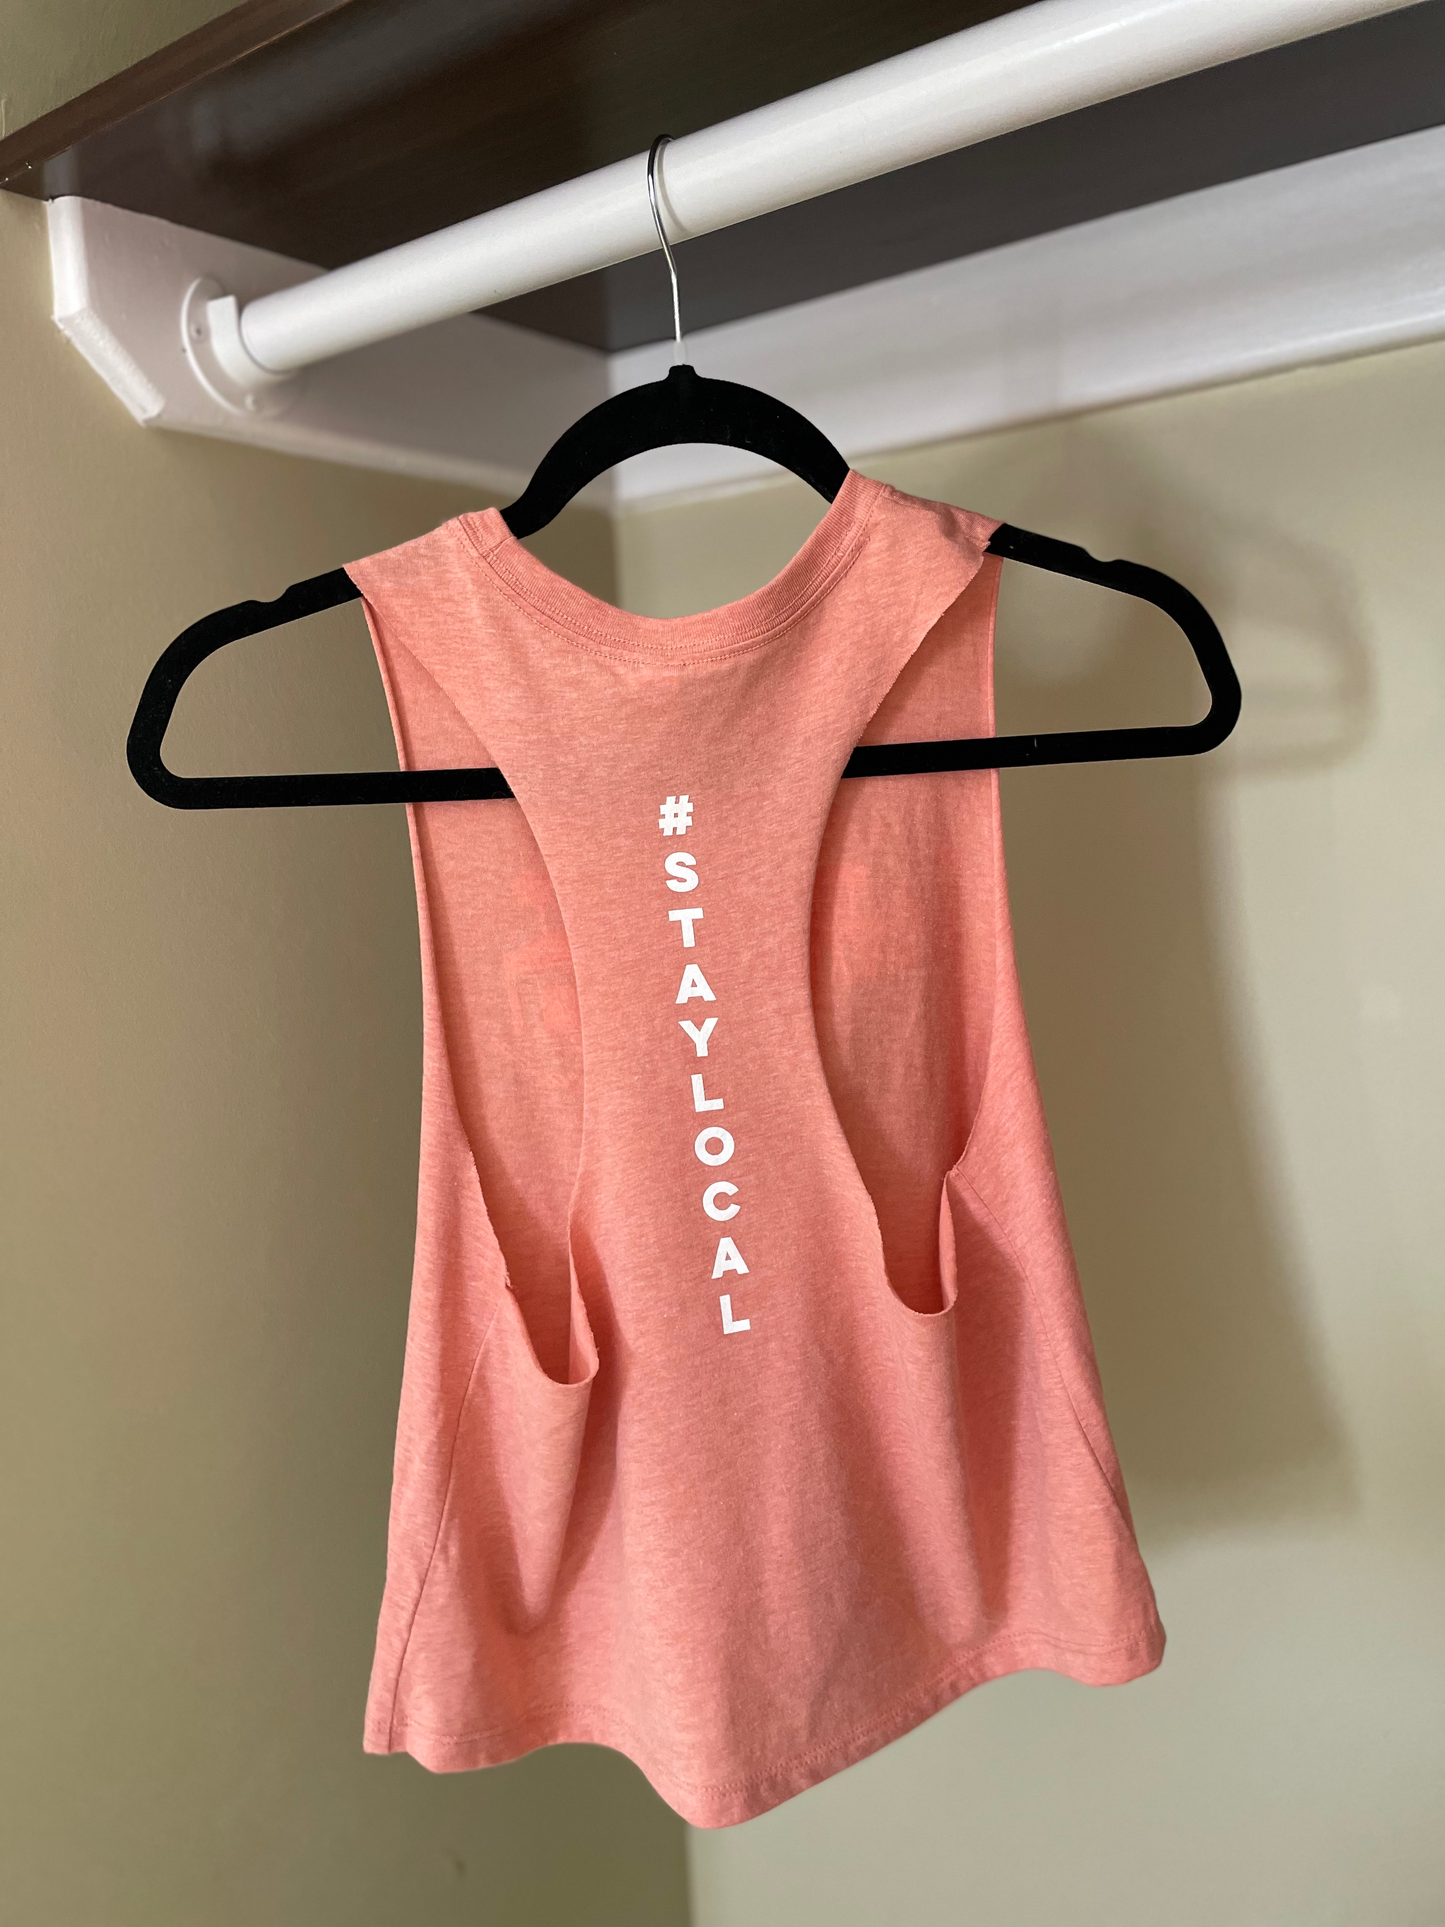 The Local - St. Augustine Crop Top